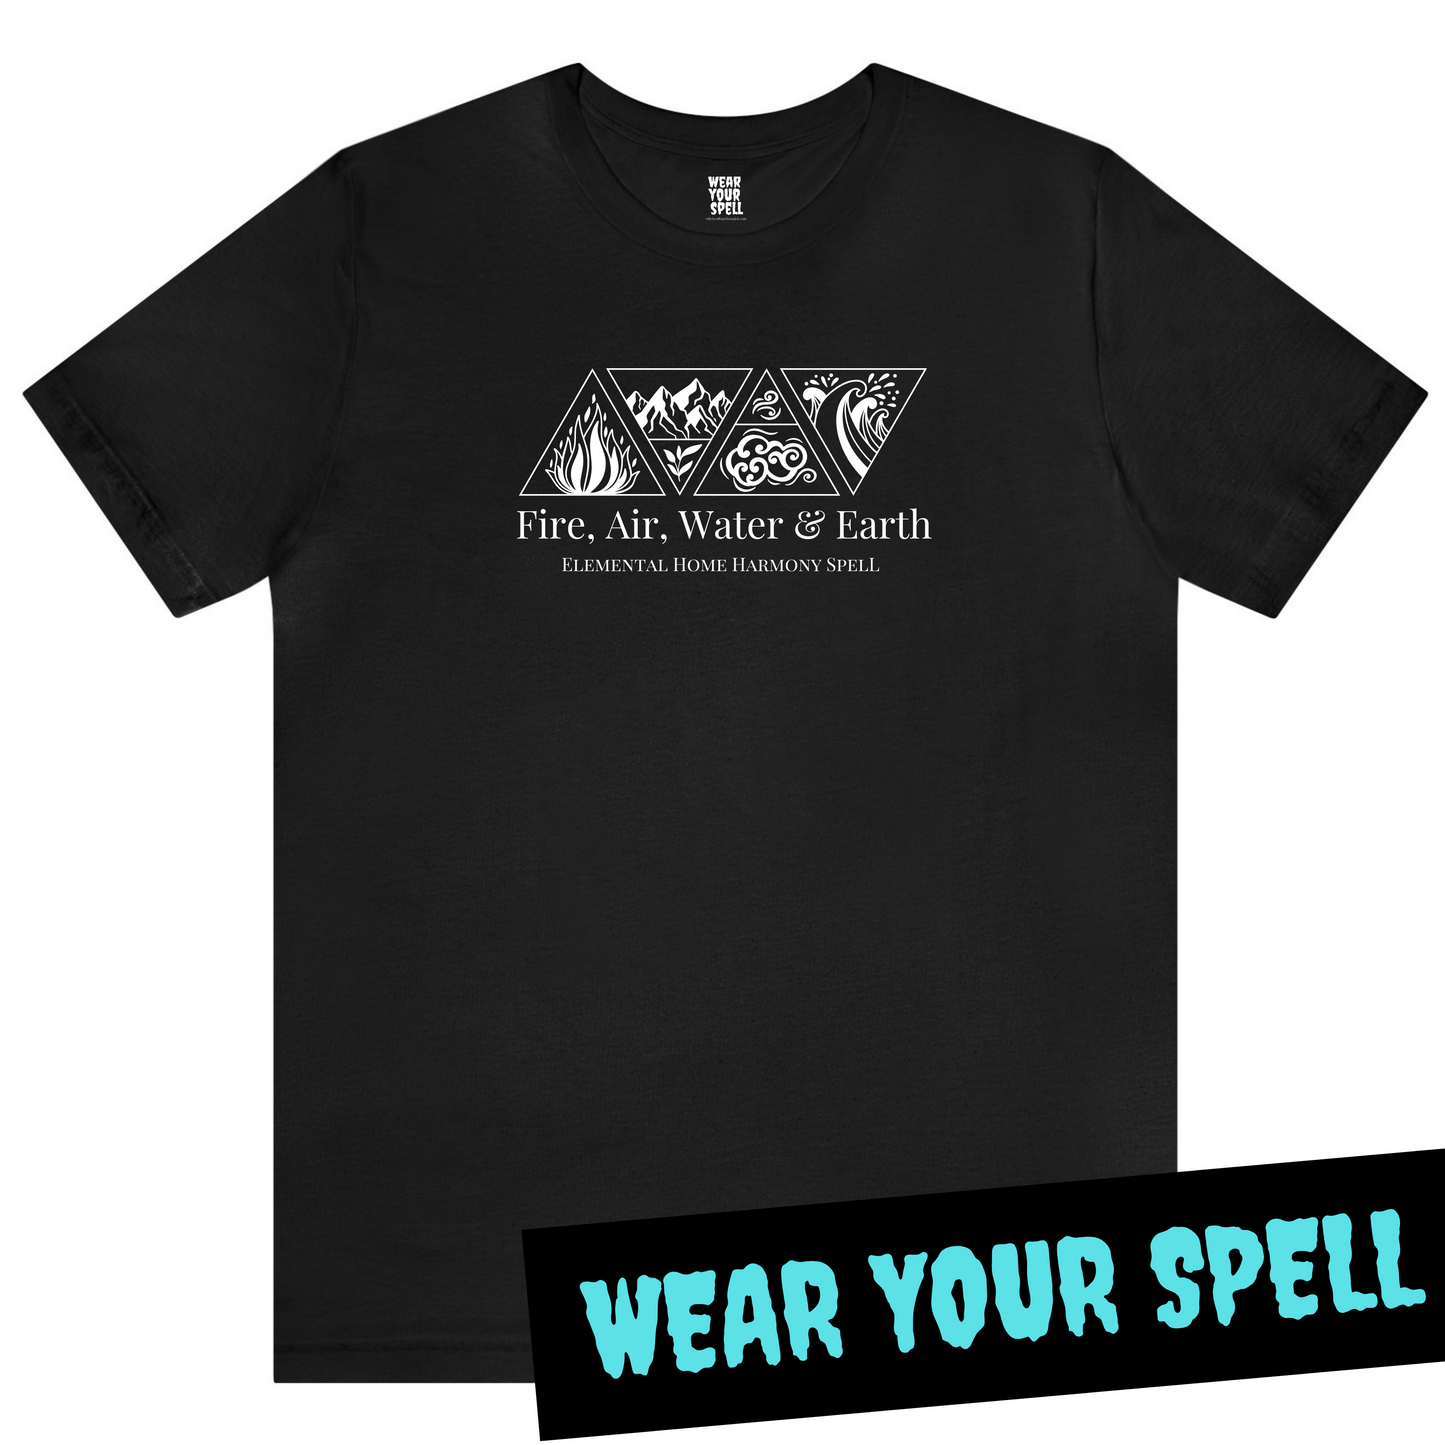 WEAR YOUR SPELL Witch T-shirt. Elemental Home Harmony Spell. Magickal correspondences: Fire, Air, Water, Earth